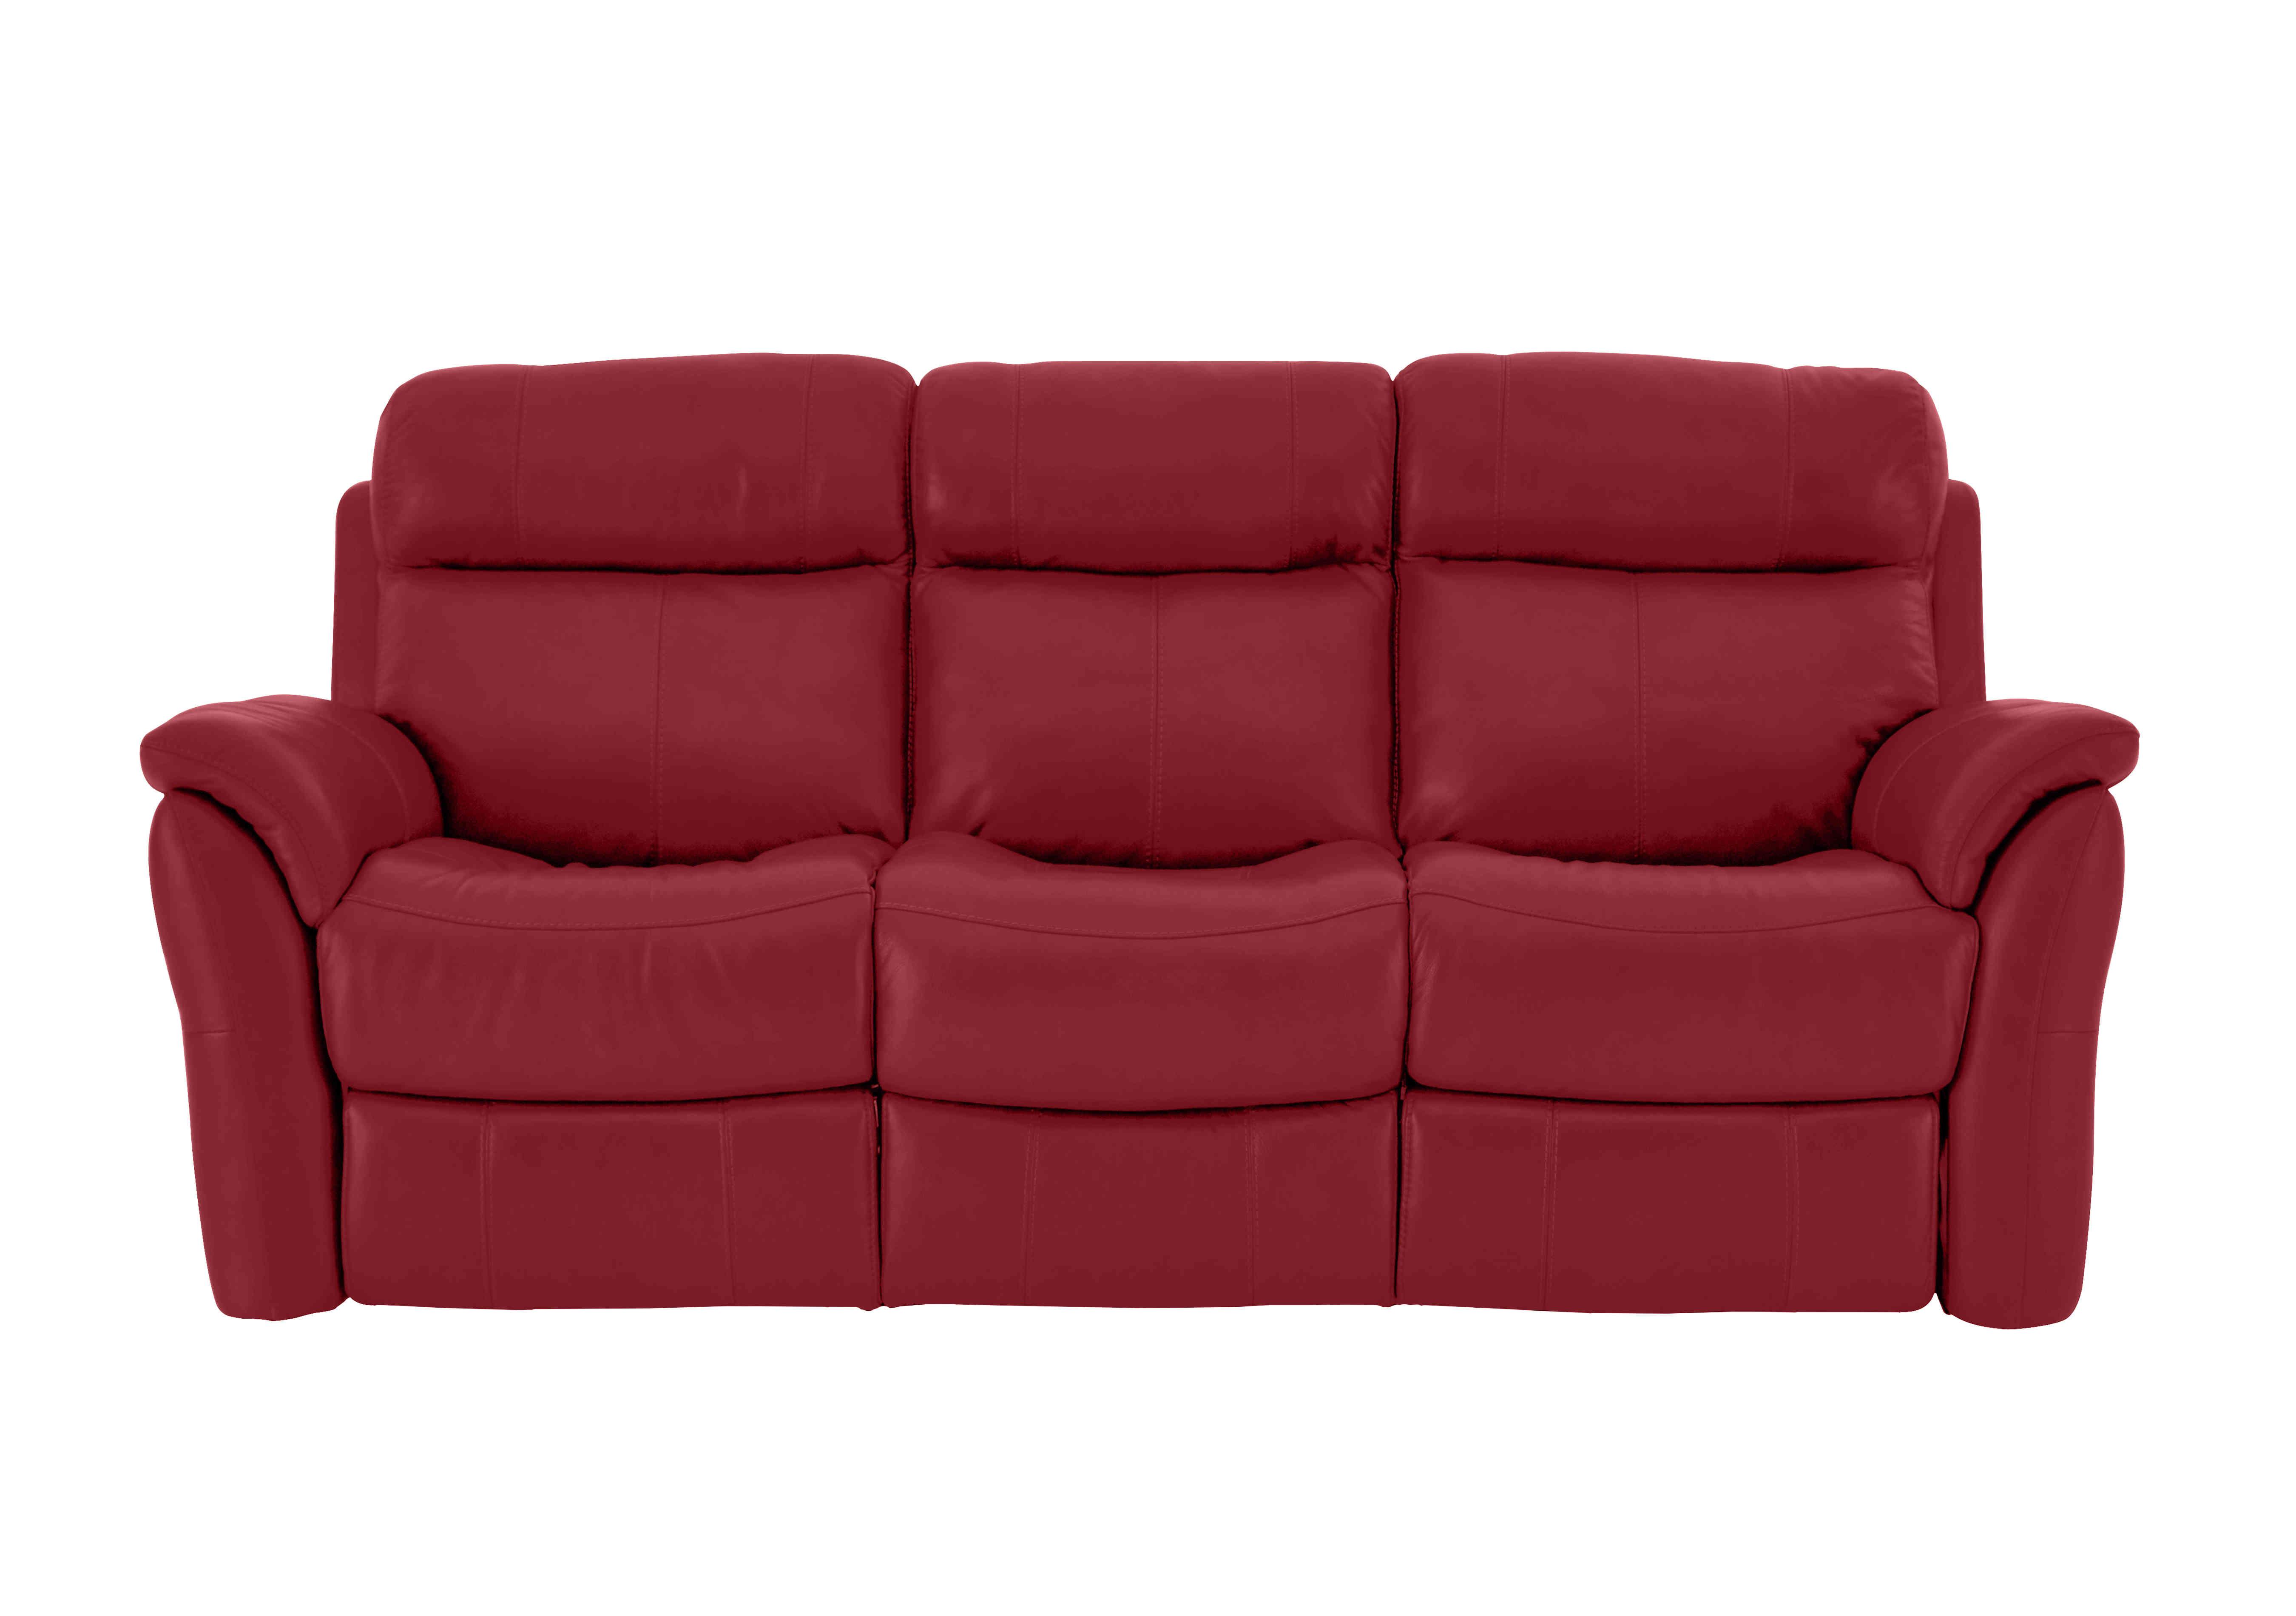 Relax Station Revive 3 Seater Leather Sofa in Bv-0008 Pure Red on Furniture Village